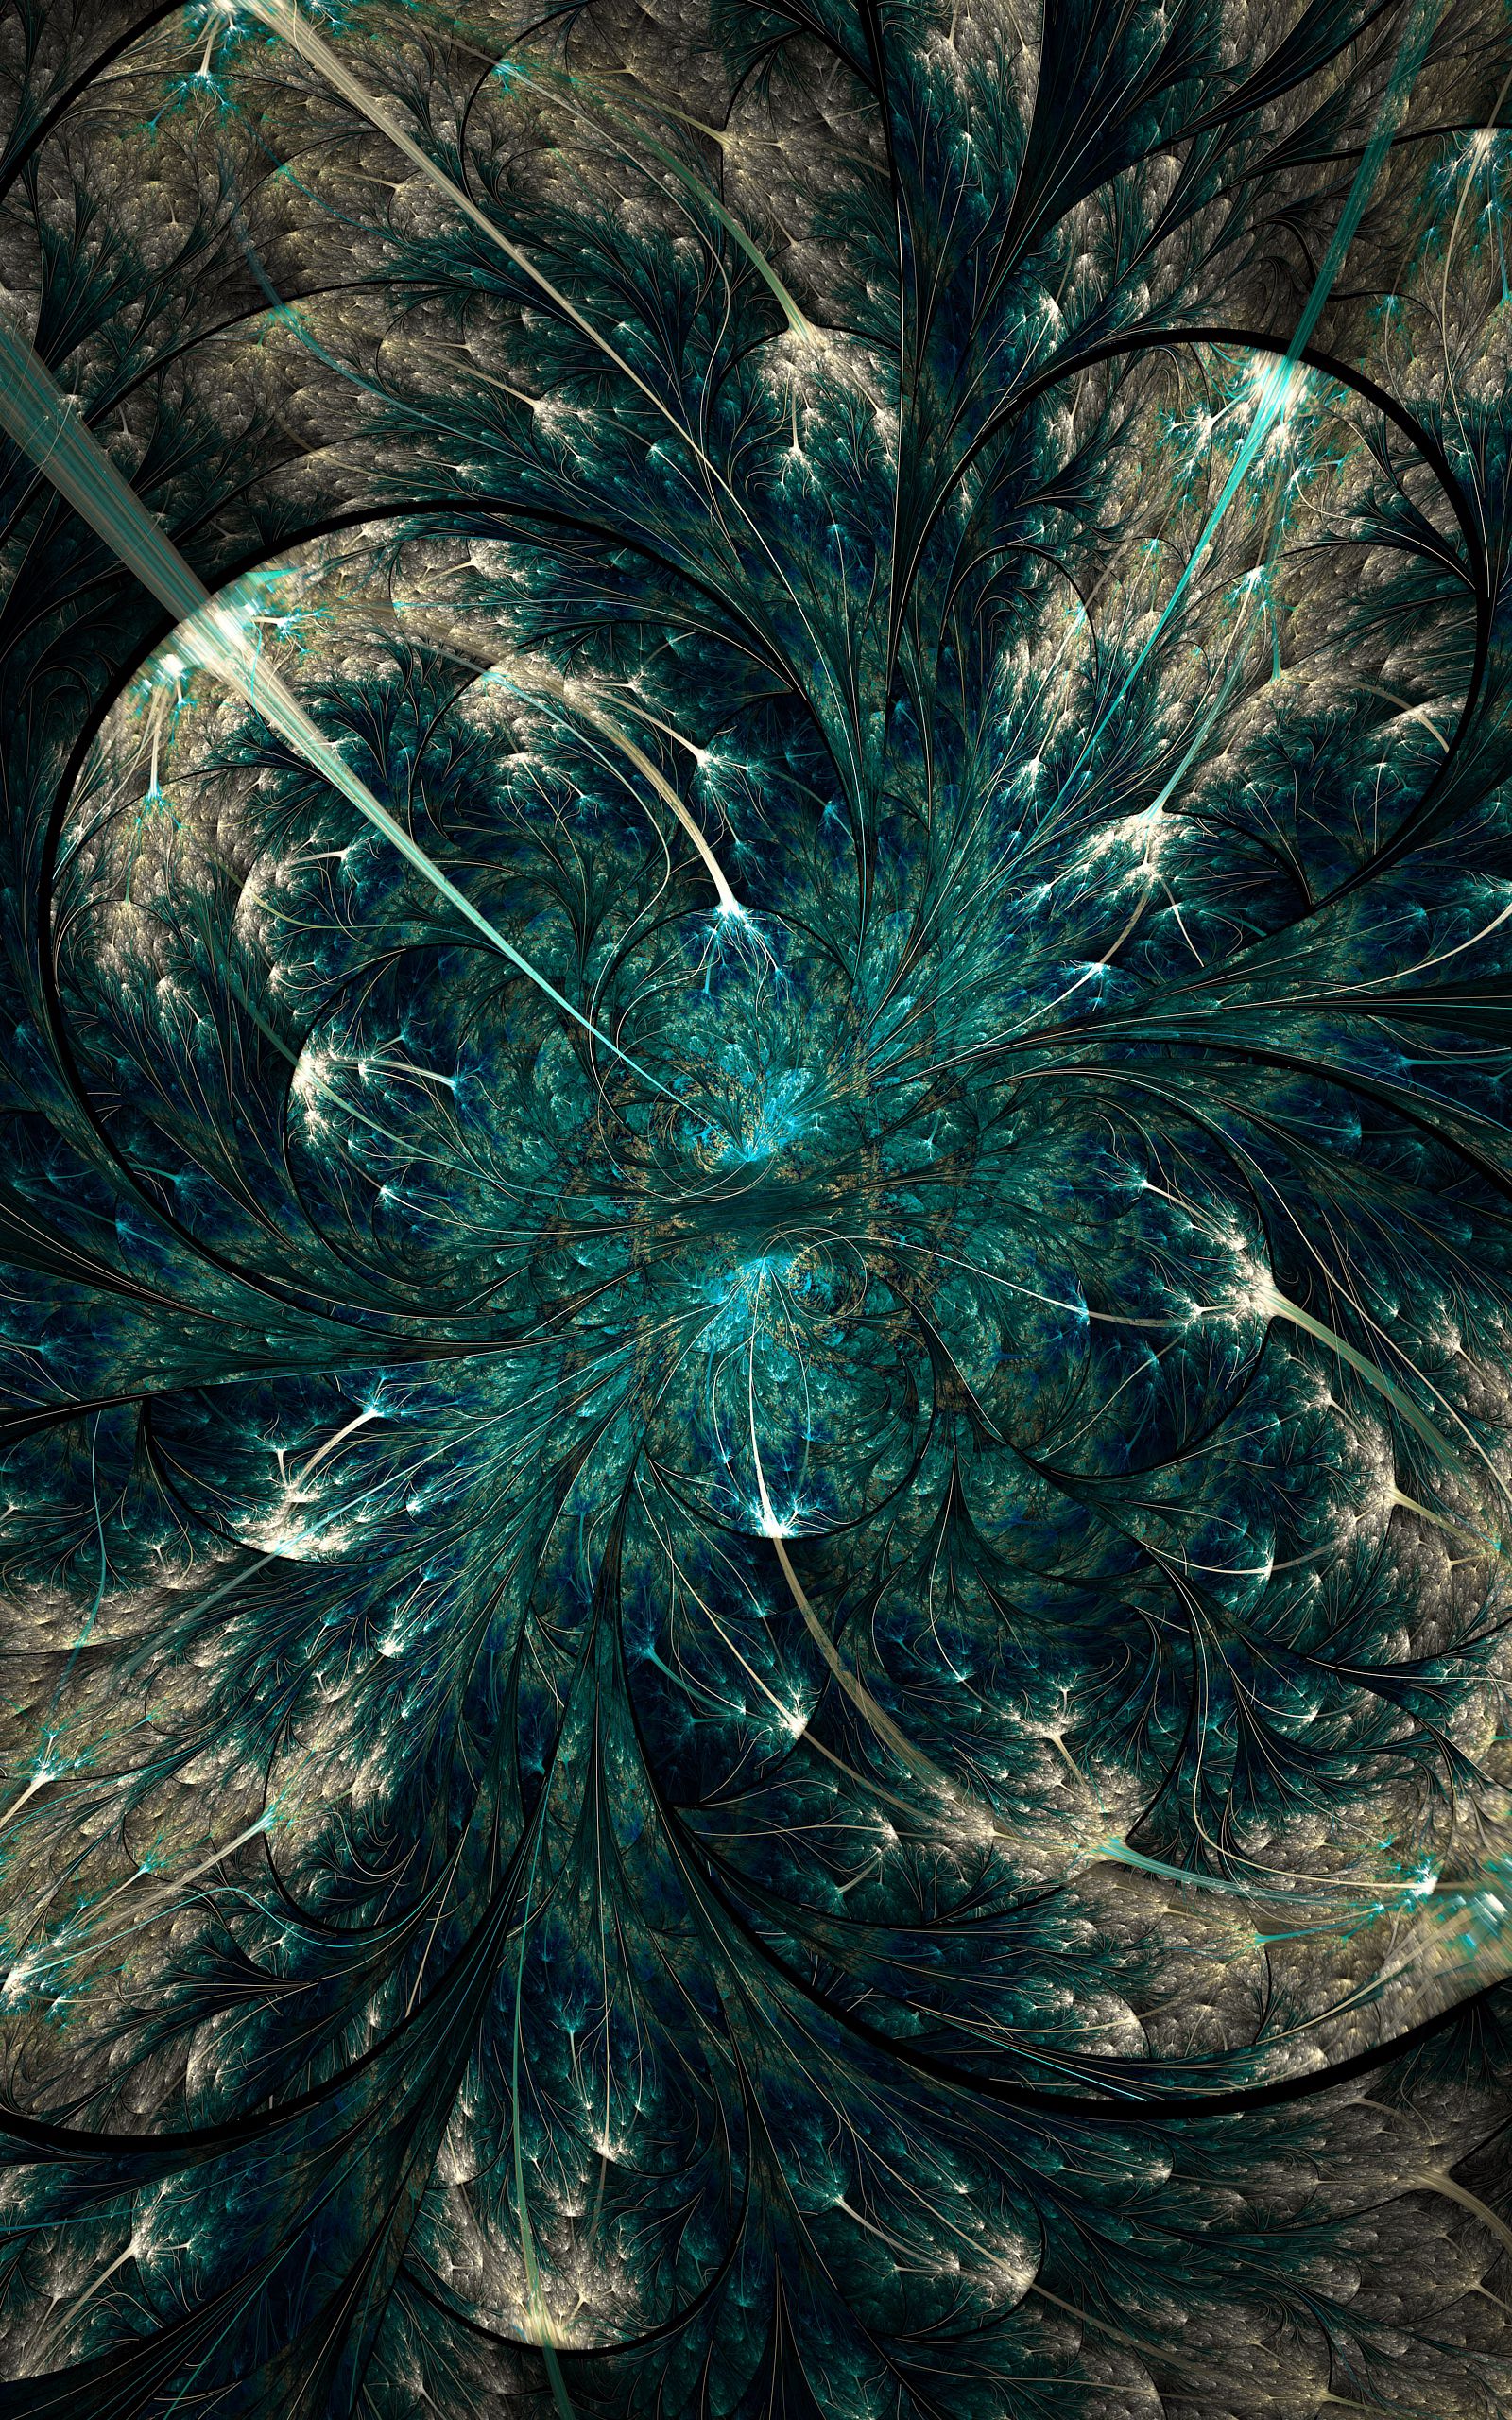 chaotic, involute, rotation, patterns, abstract, fractal, swirling UHD